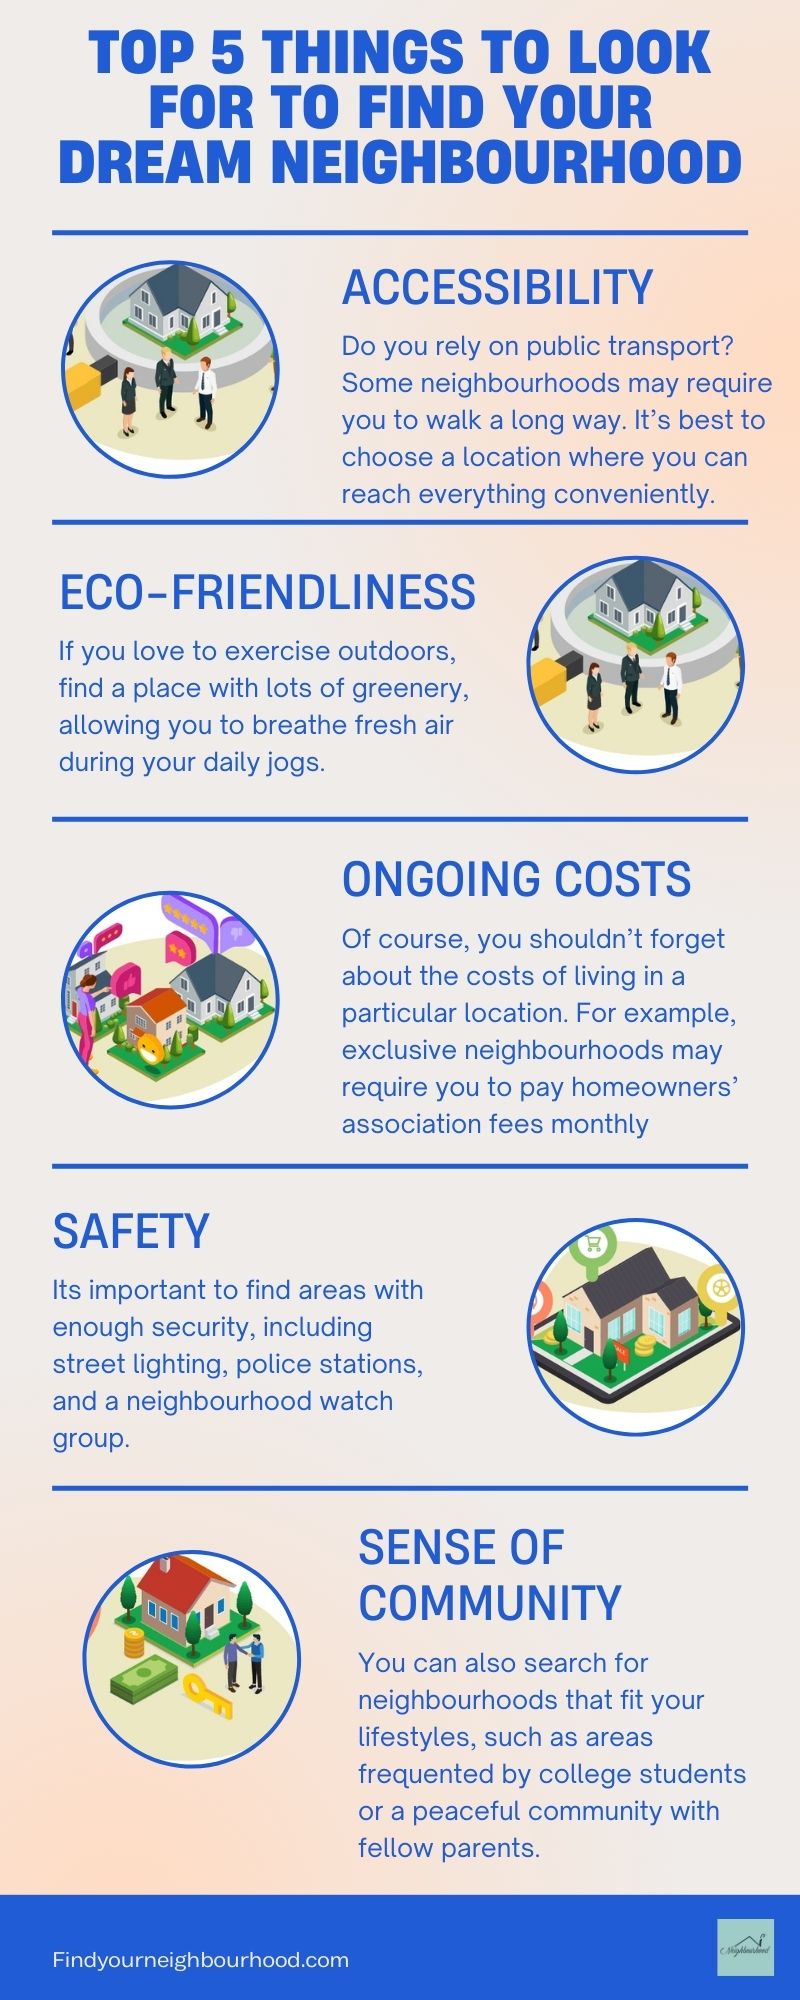 Top 5 Things to Look for to Find Your Dream Neighbourhood.jpg  by Terahome360Inc